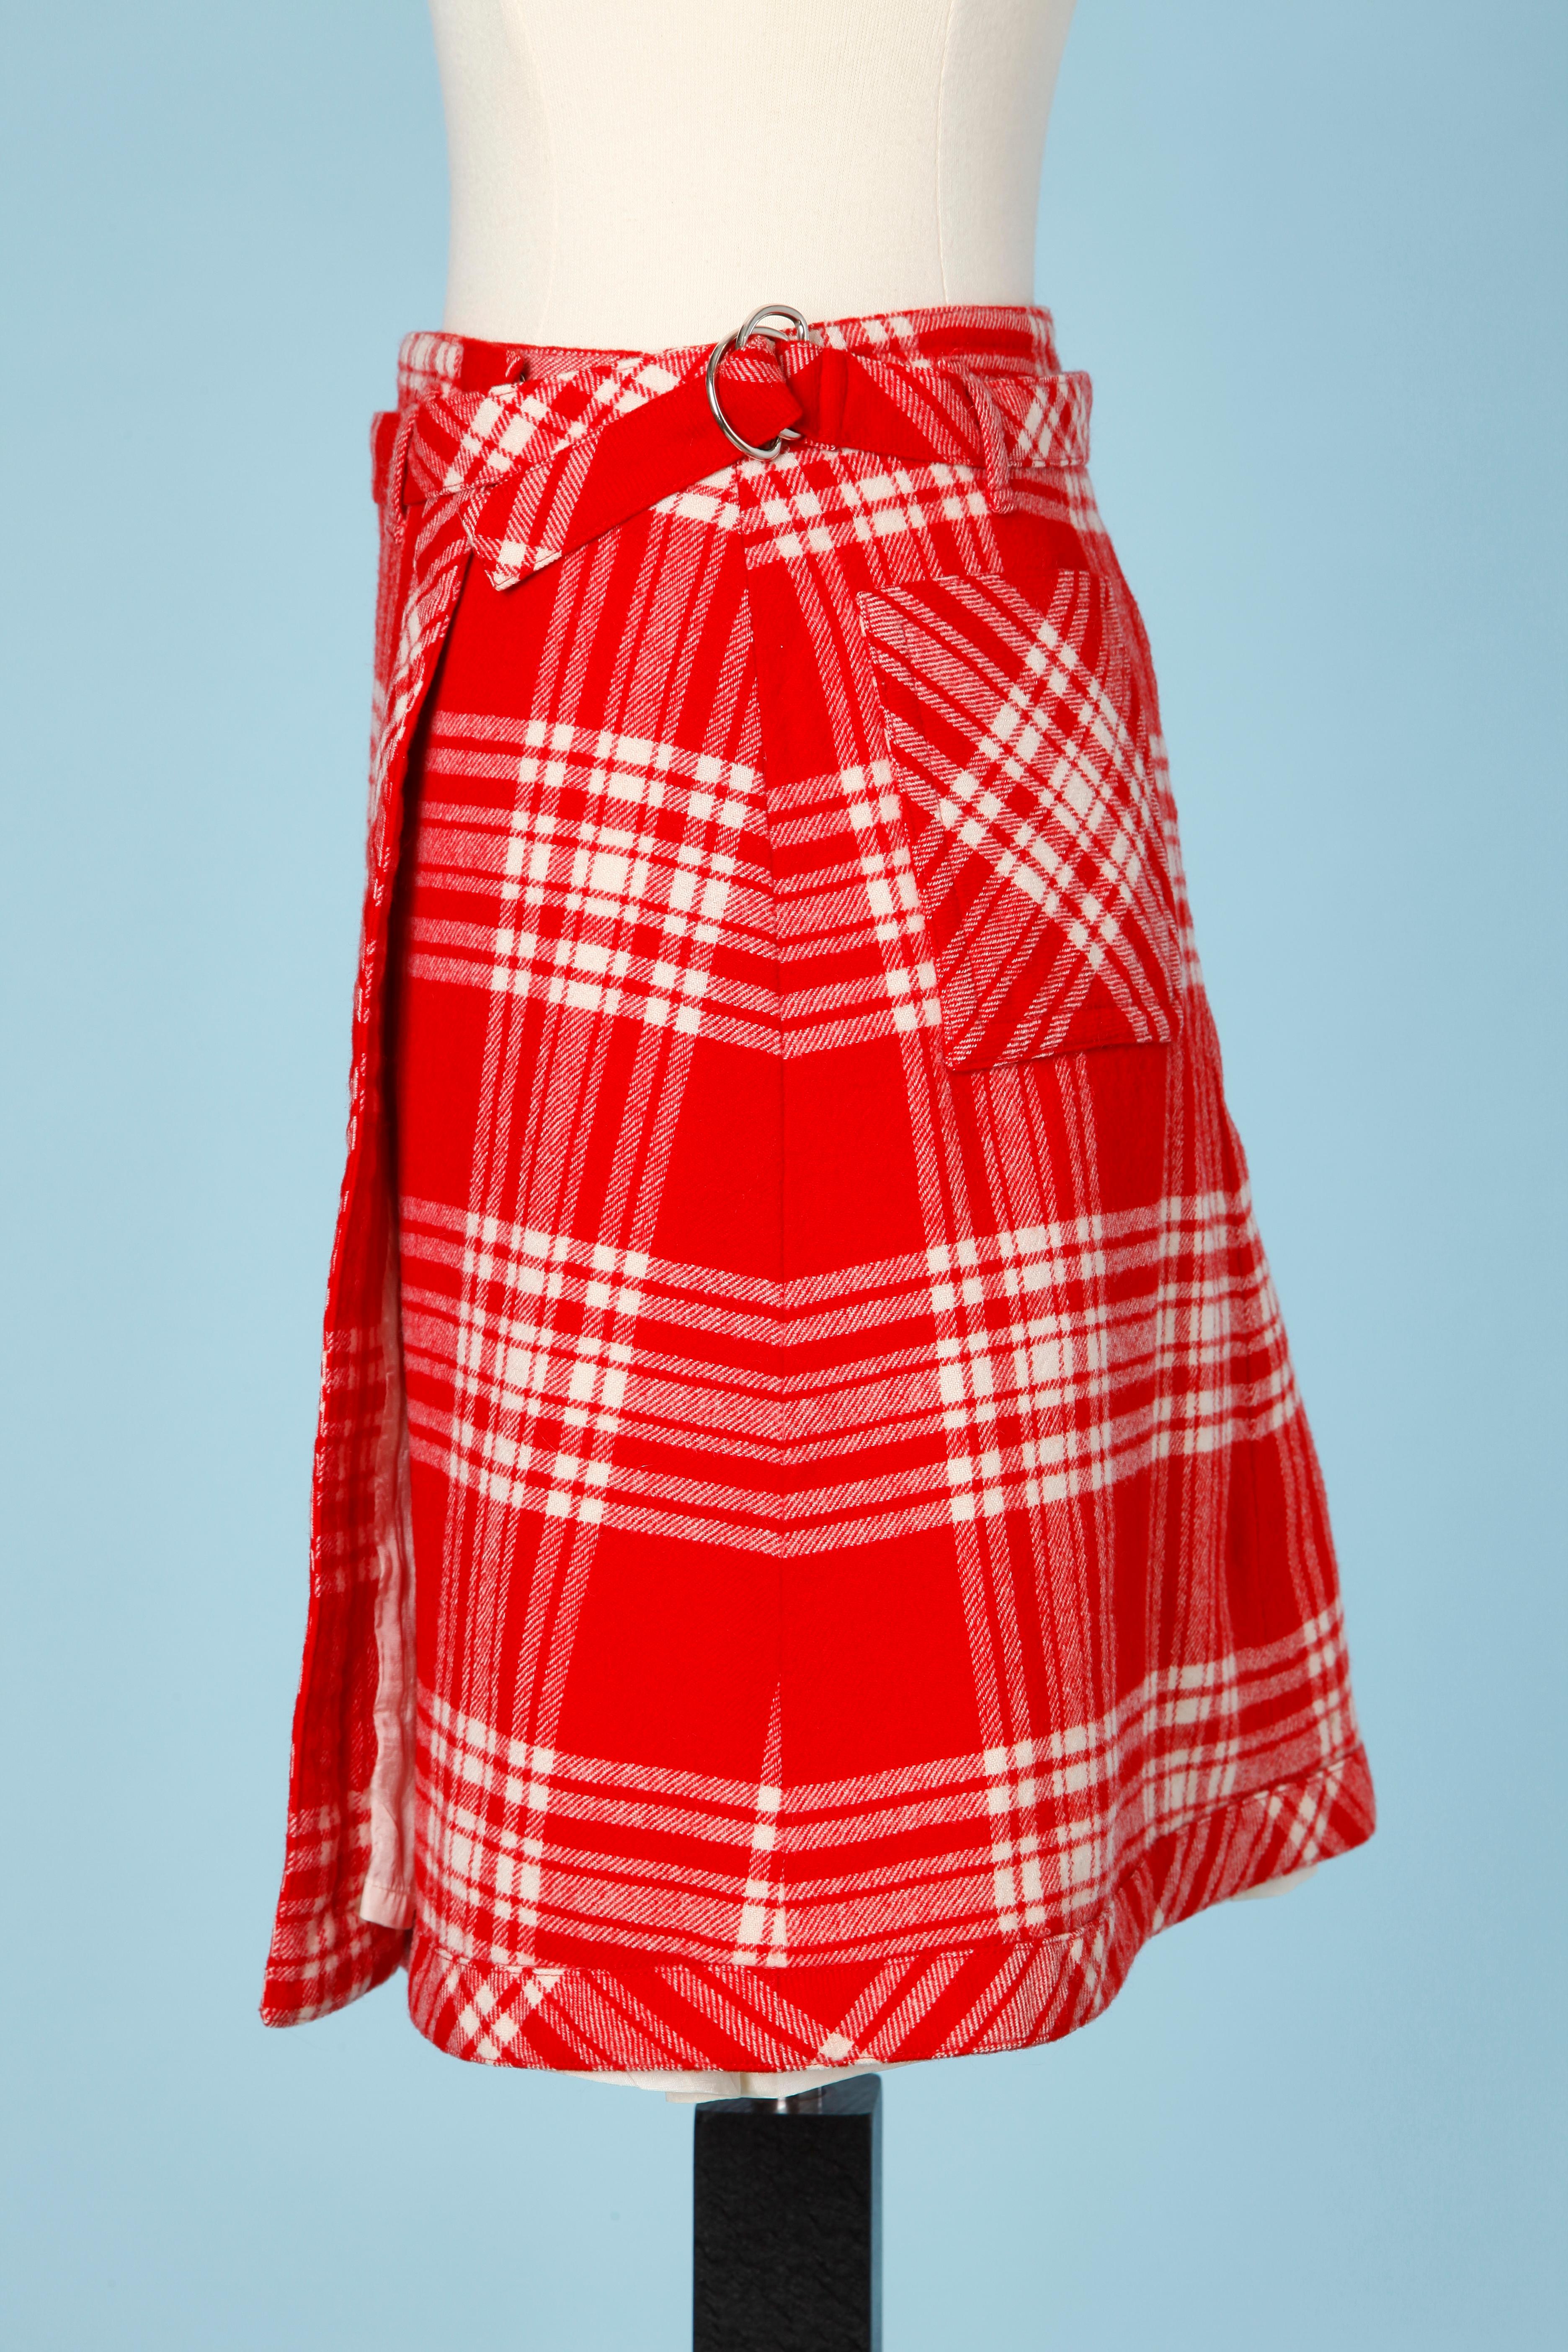 red and white plaid skirt